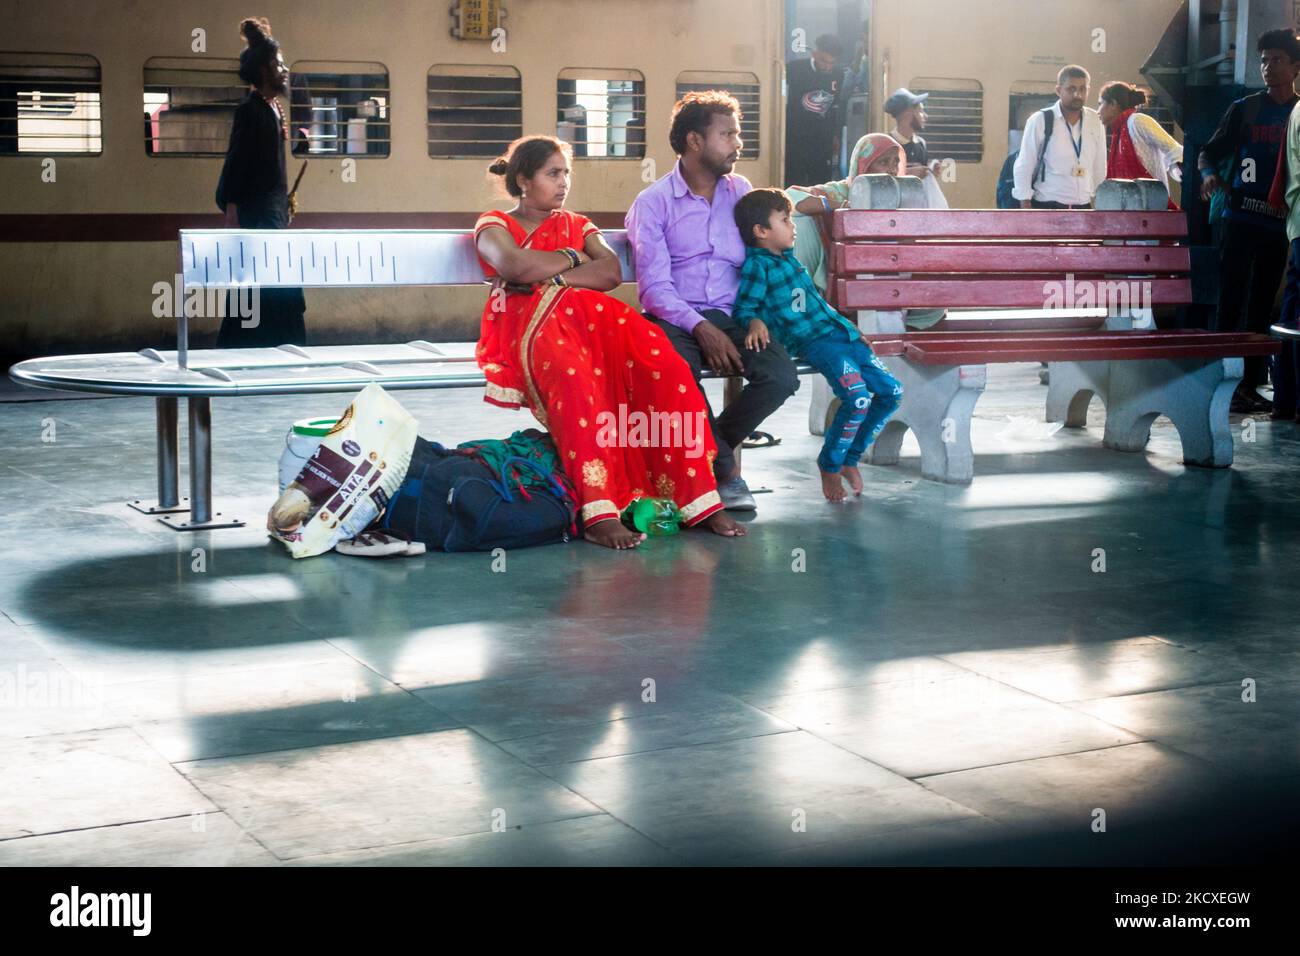 July 4th 2022 Punjab India. A small town family, husband wife and their kid waiting on a Railway platform with luggage. India Stock Photo